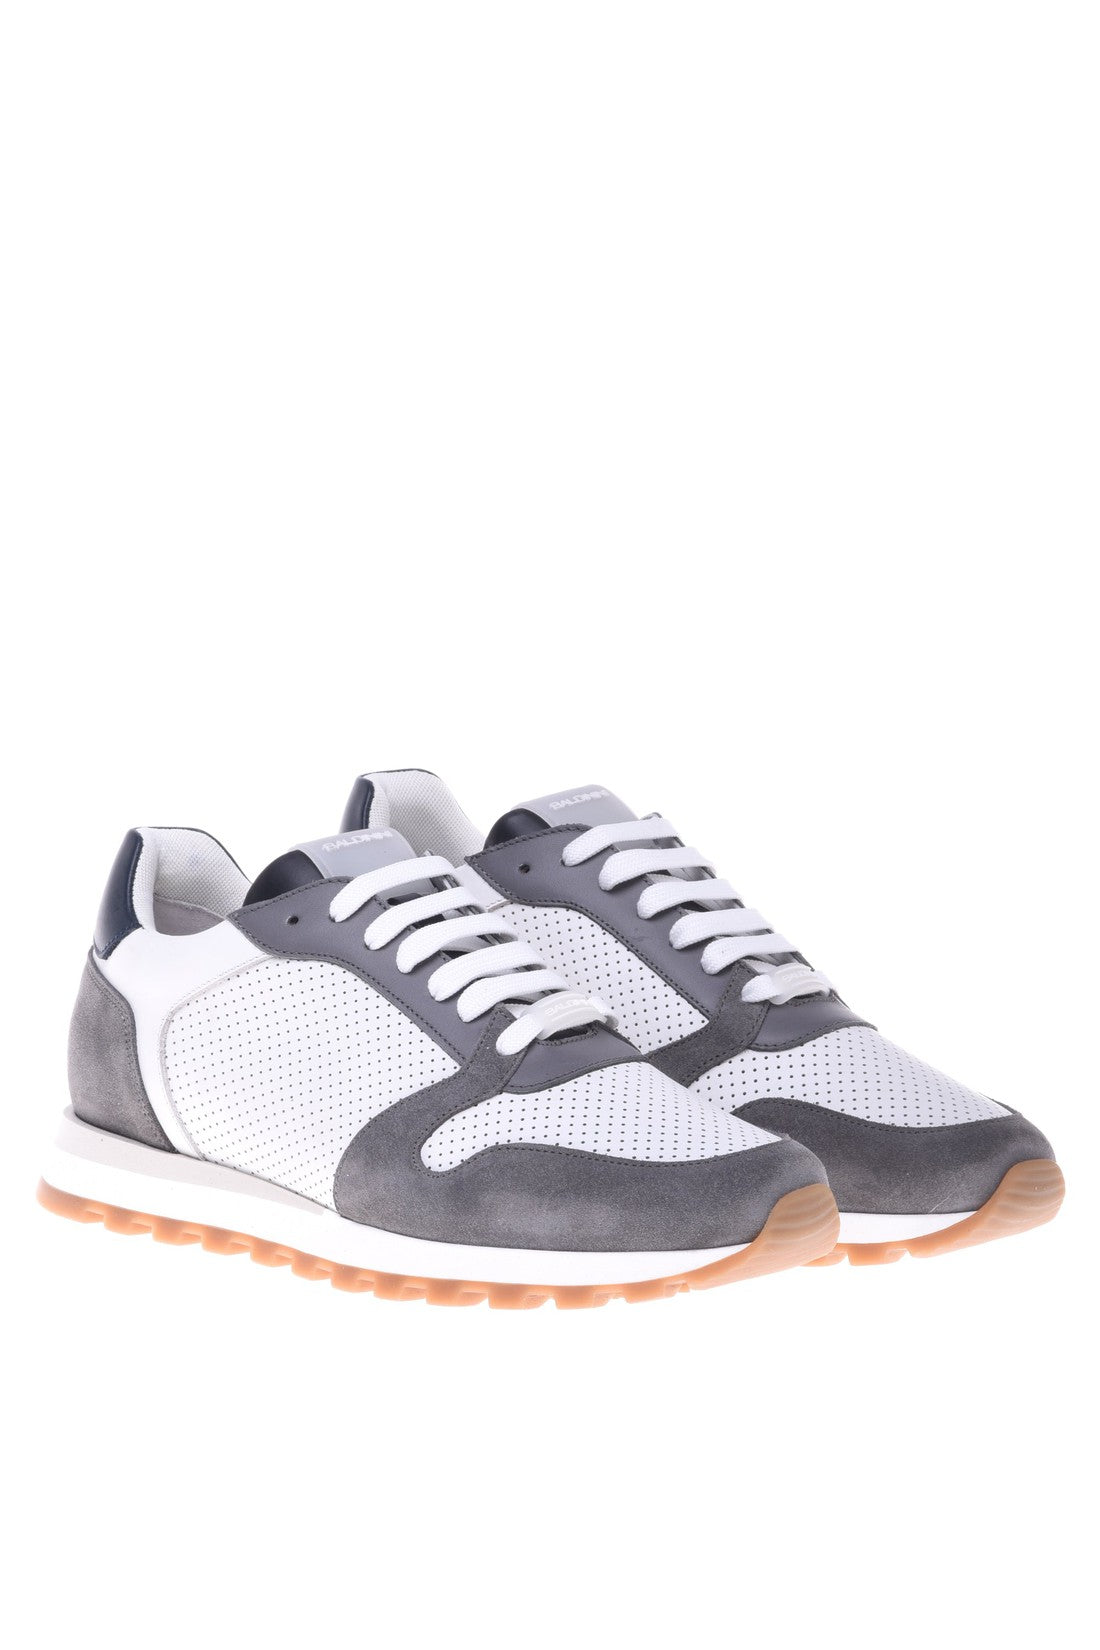 Sneaker in grey and white suede and calfskin